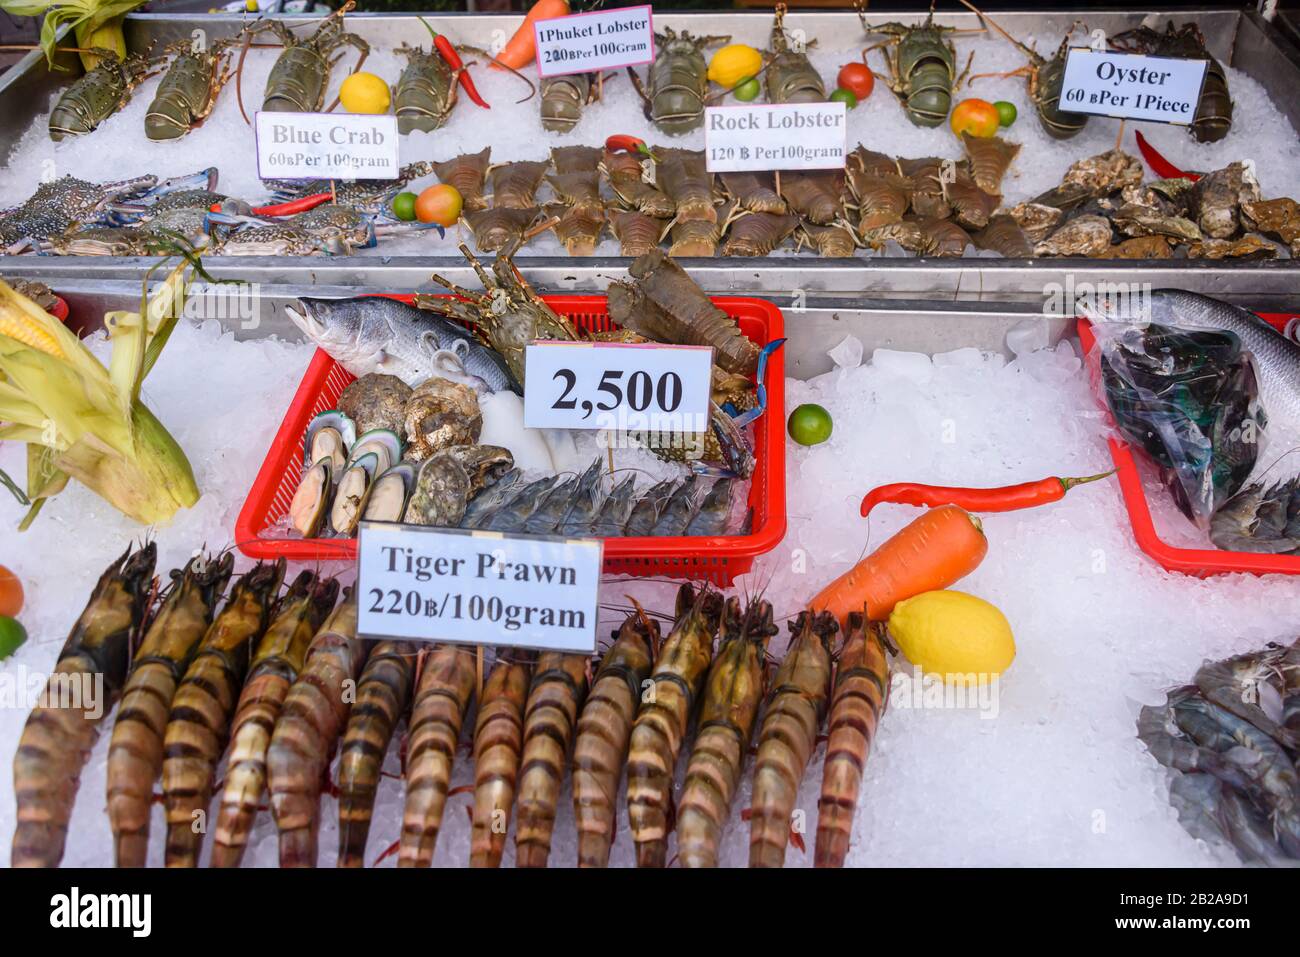 Large Tiger Prawns, fish, shellfish, lobster, crabs on ice for sale at a street food market stall in Phuket, Thailand Stock Photo